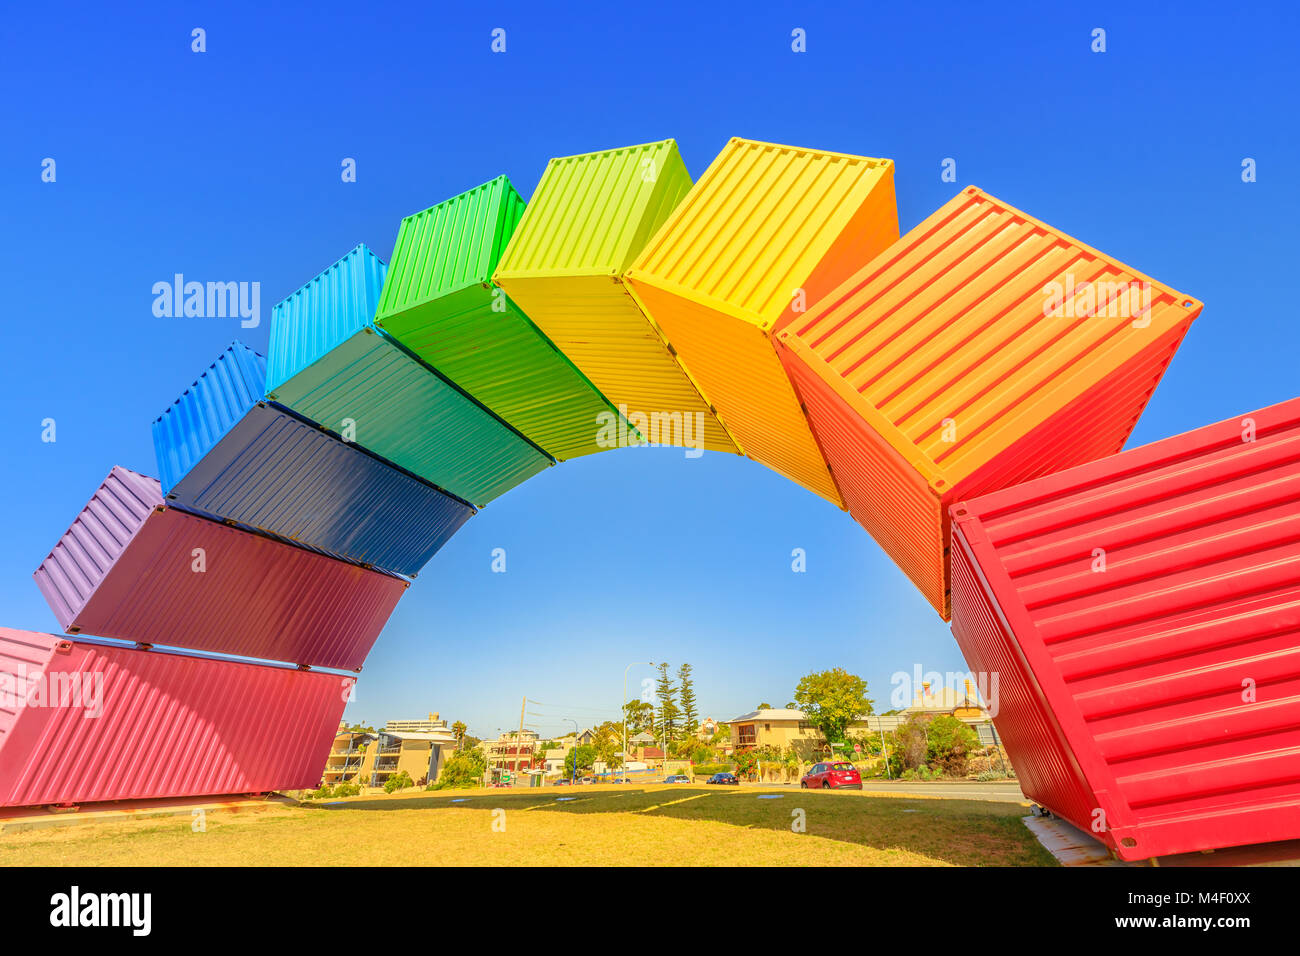 Fremantle, Australia - Jan 7, 2018: Fremantle travel welcome. Rainbow Sea Container in Fremantle Port near Perth, Western Australia. Homosexuality and hope concept. Blue sky. Copy space. Stock Photo